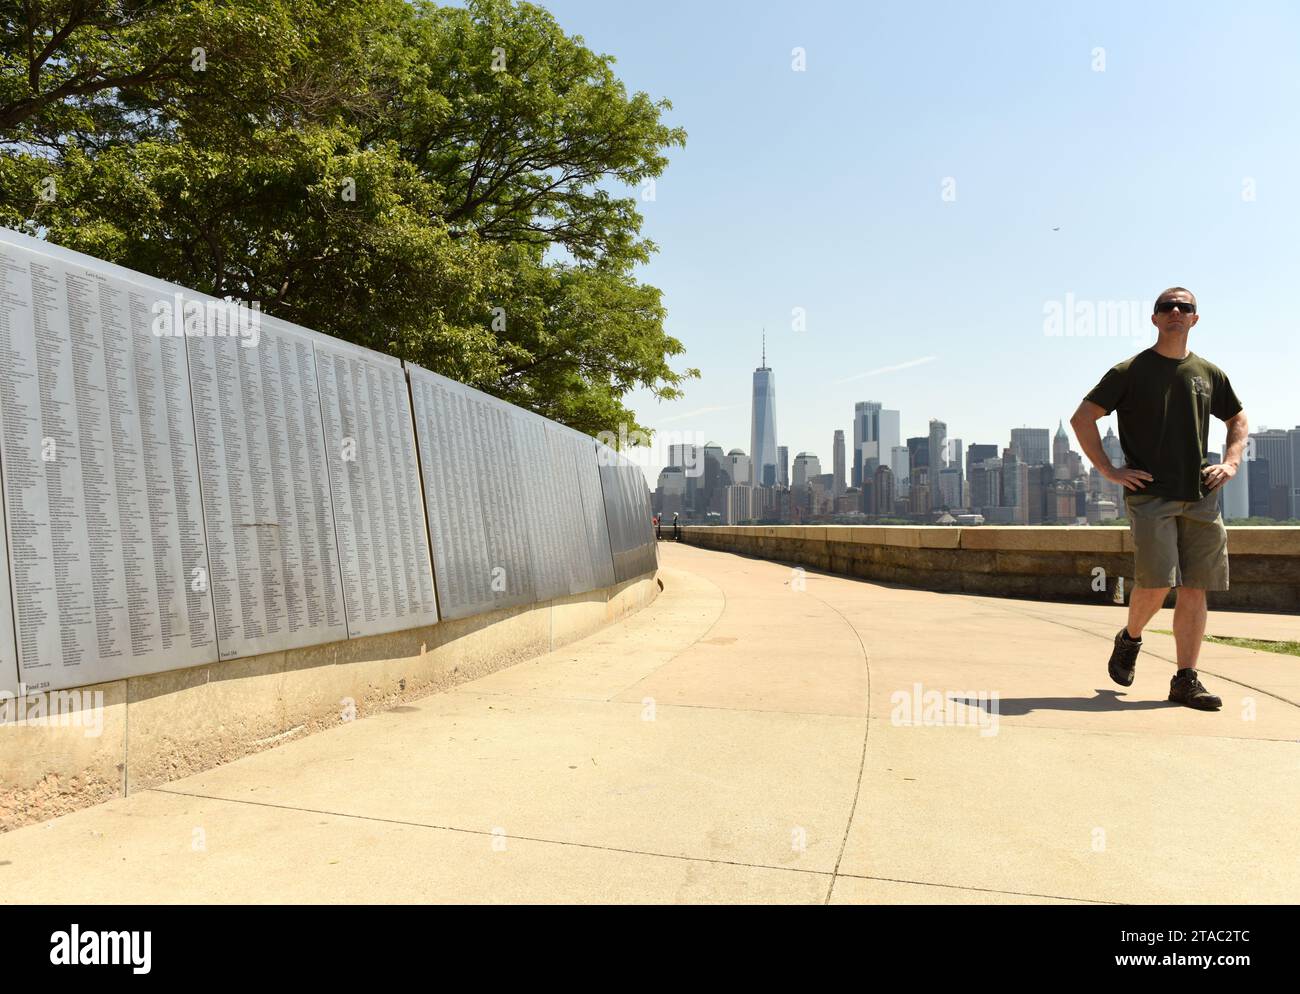 New York, USA - June 09, 2018: Man near the American Immigrant Wall of Honor is located at the Ellis Island National Museum overlooks the Lower Manhat Stock Photo